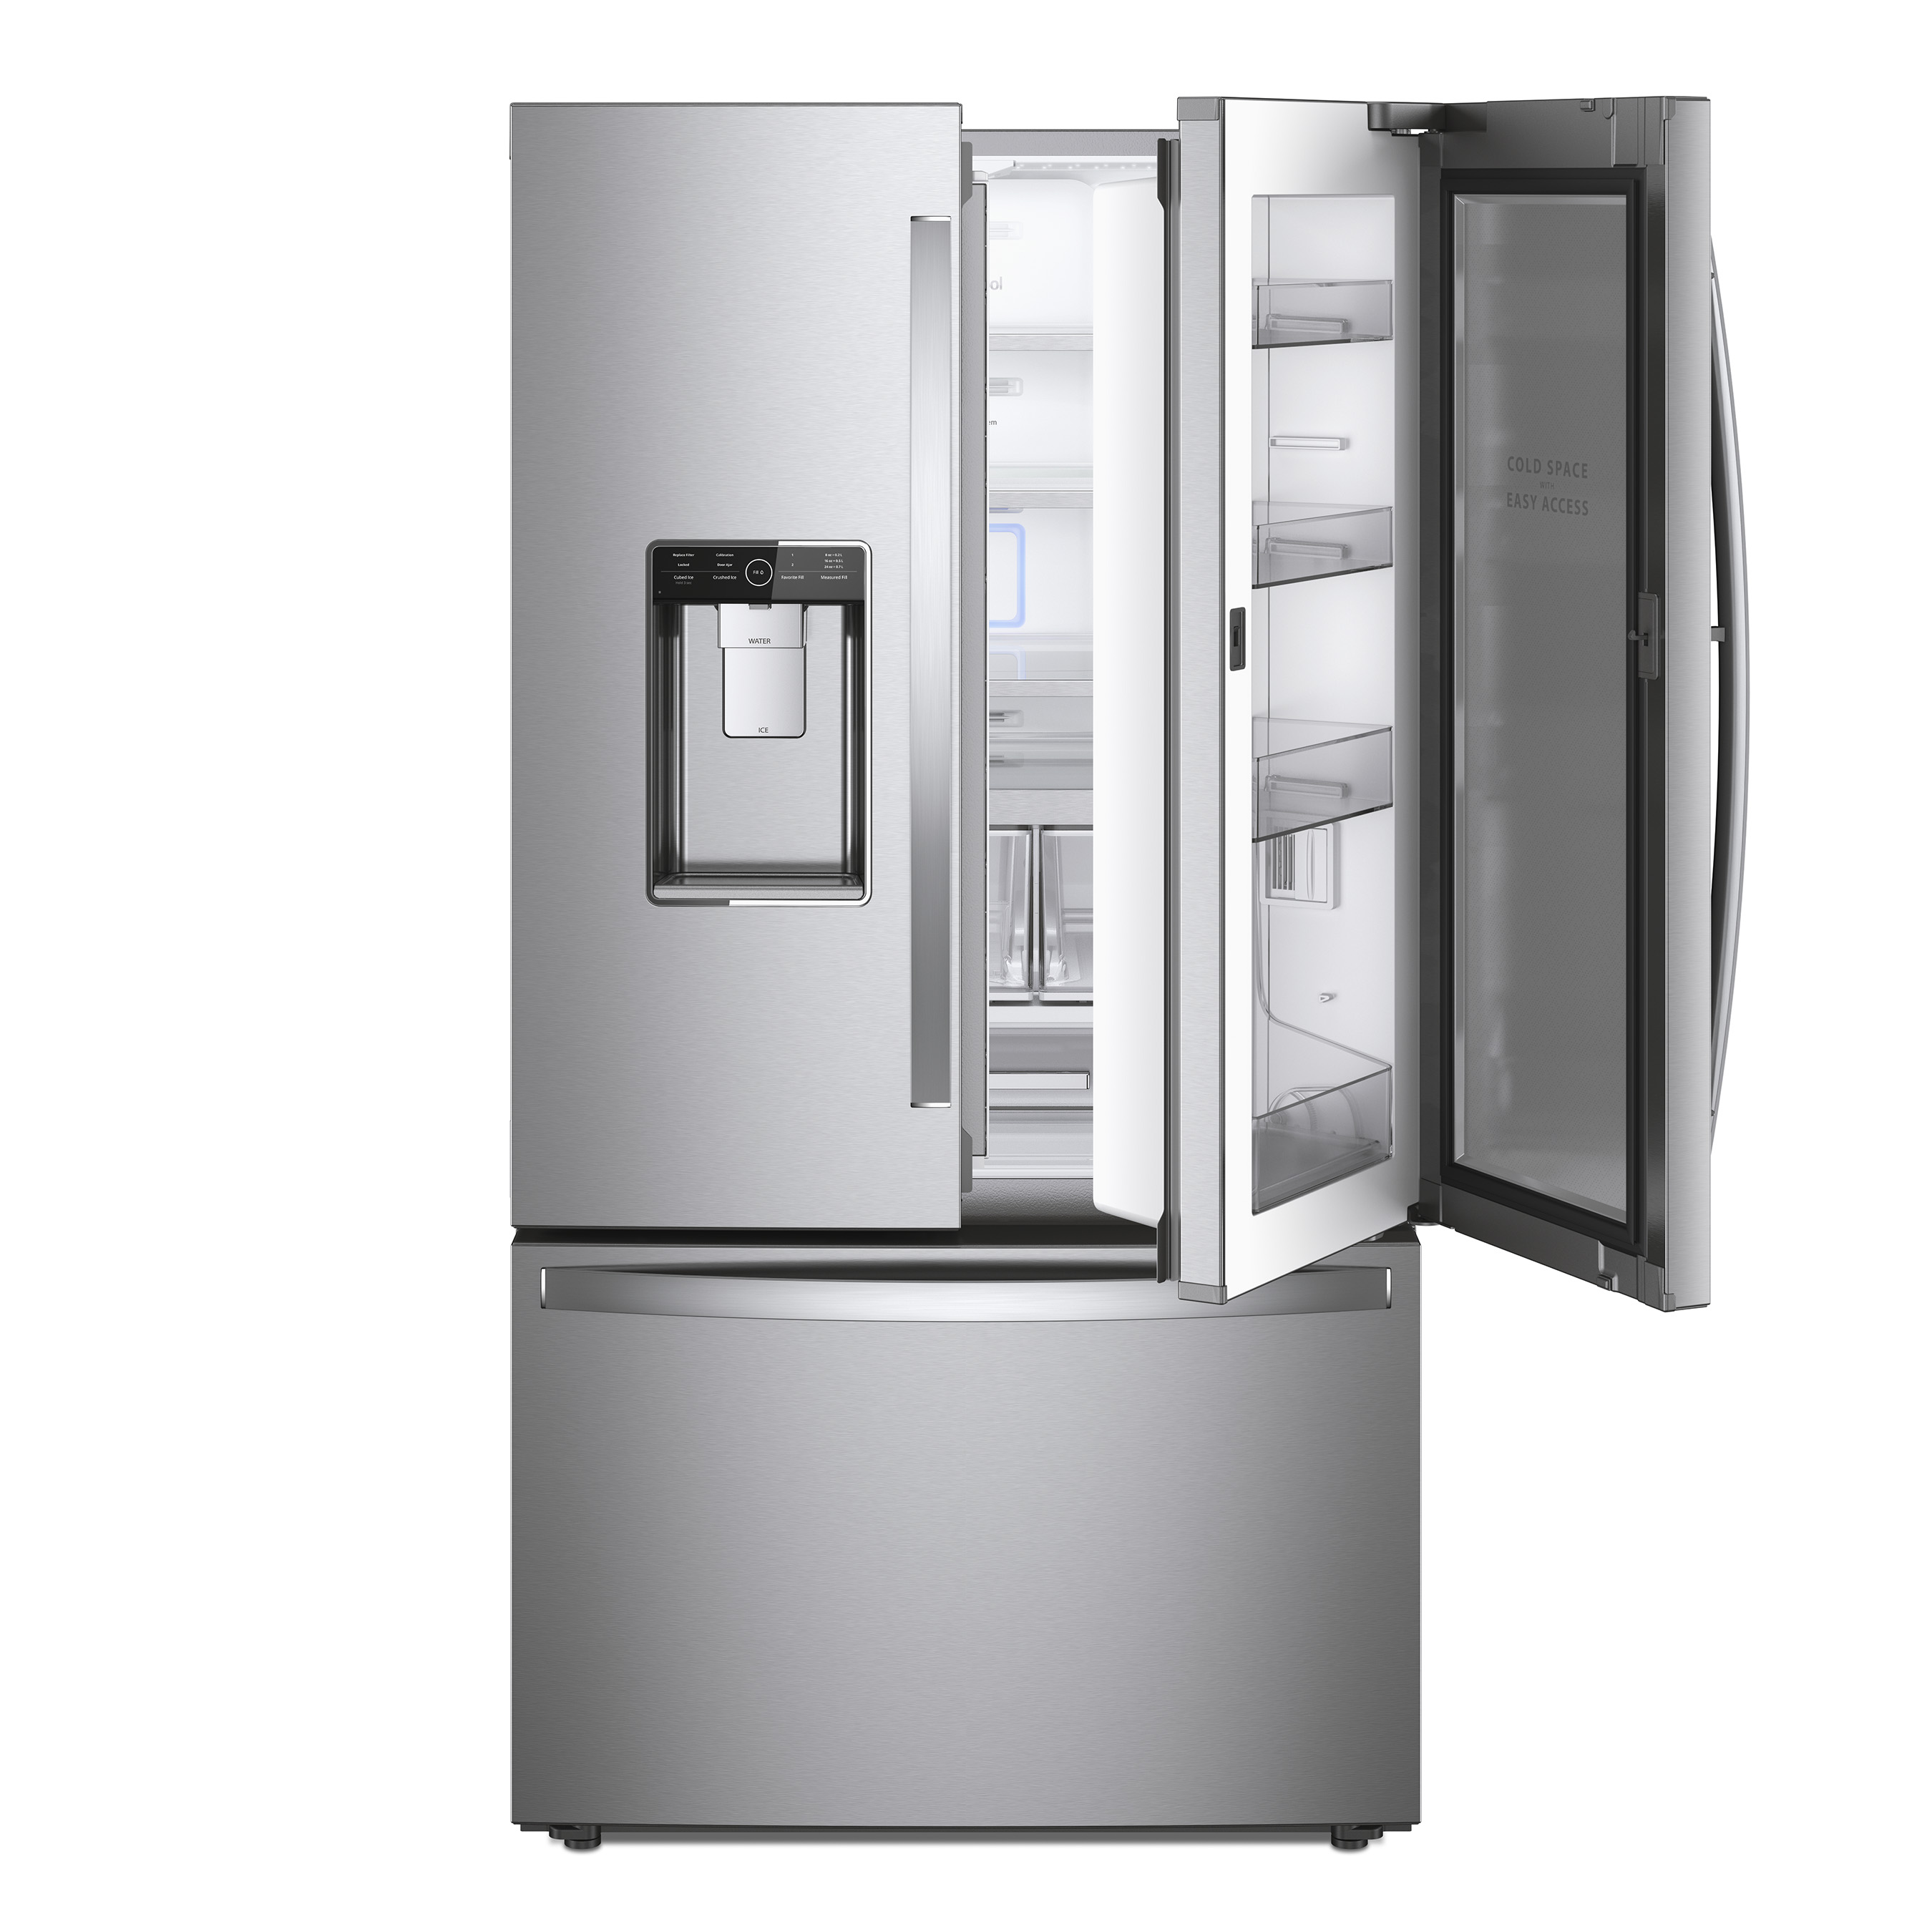 A fit for every family: the Whirlpool® French Door-within-Door Refrigerator features a designated “Cold Space” that keeps milk and other drinks extra cold.